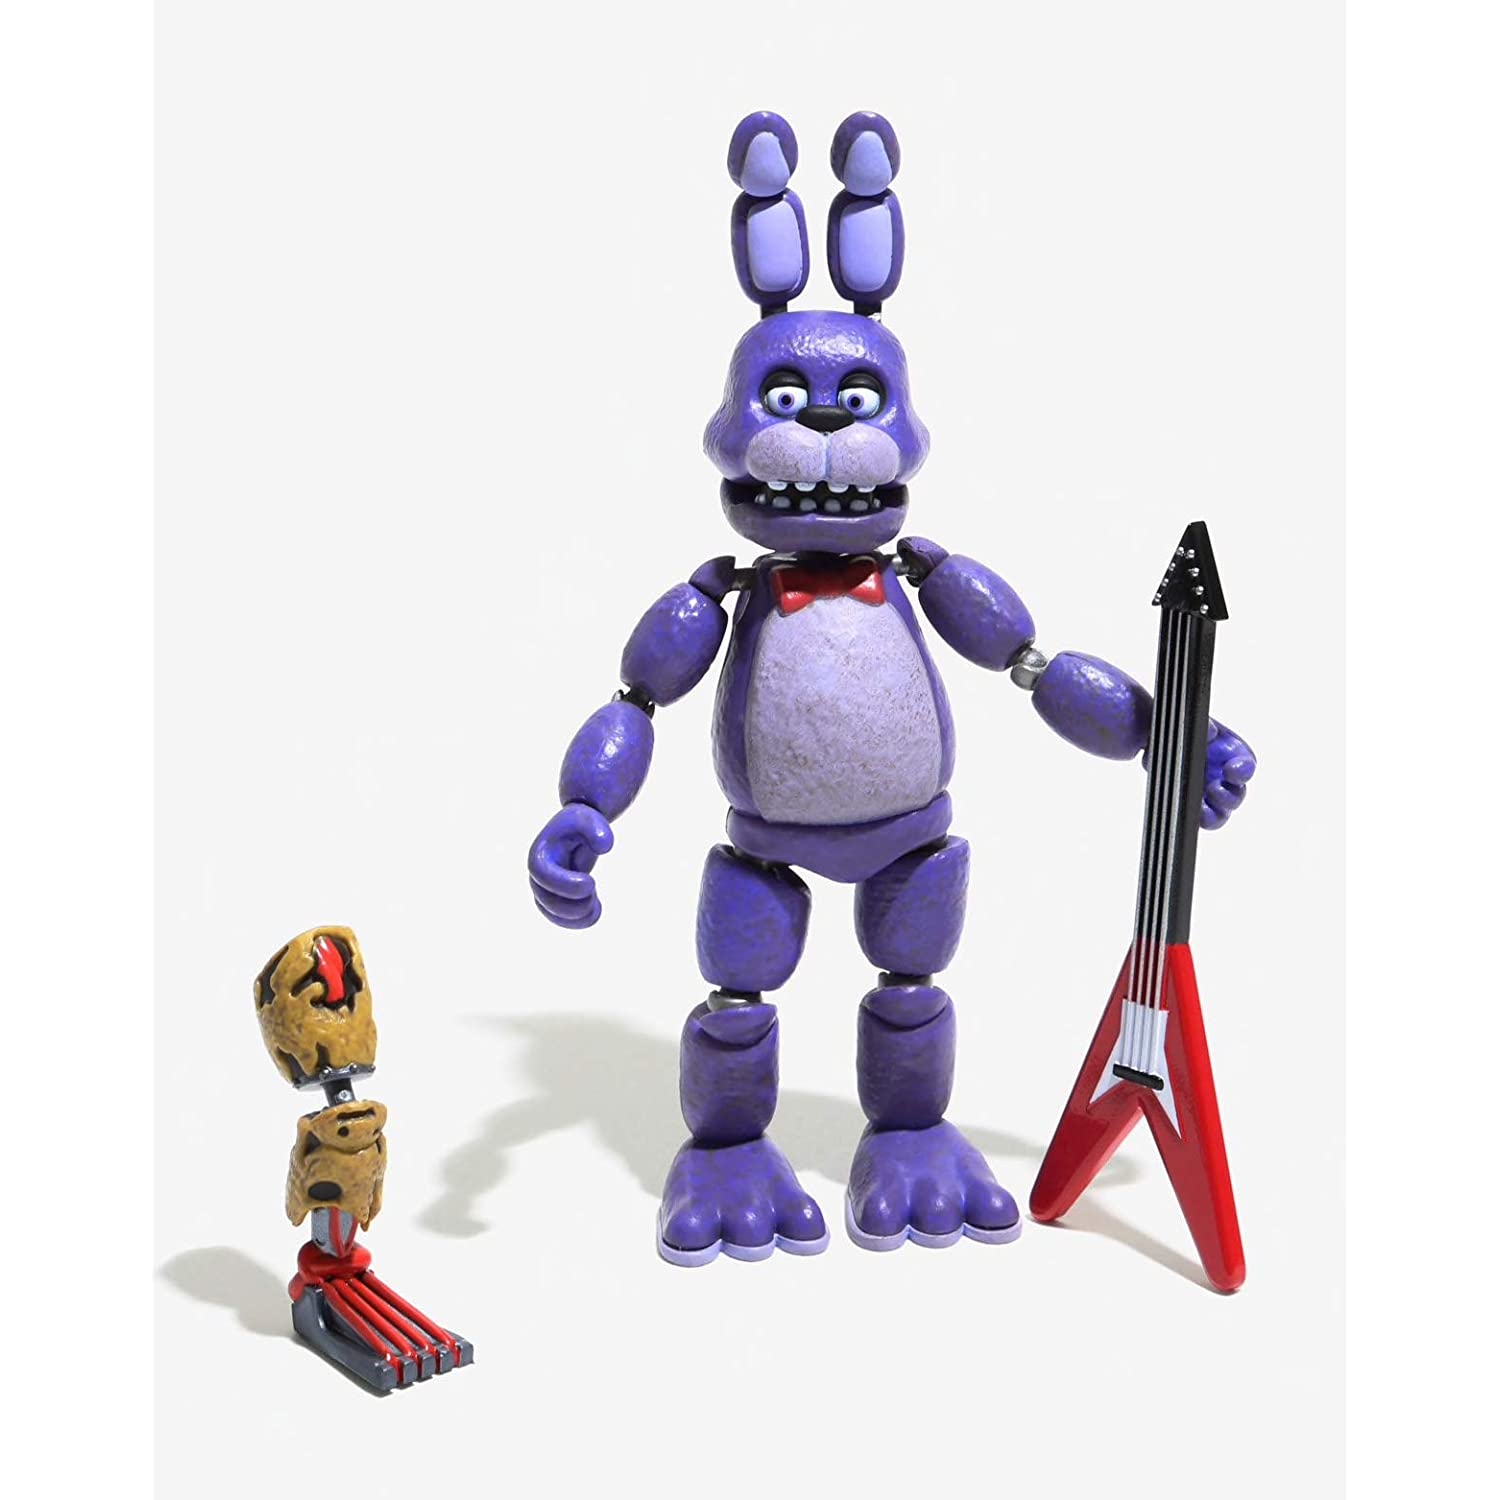 Funko Five Nights at Freddy's Baby Articulated Action Figure, 5